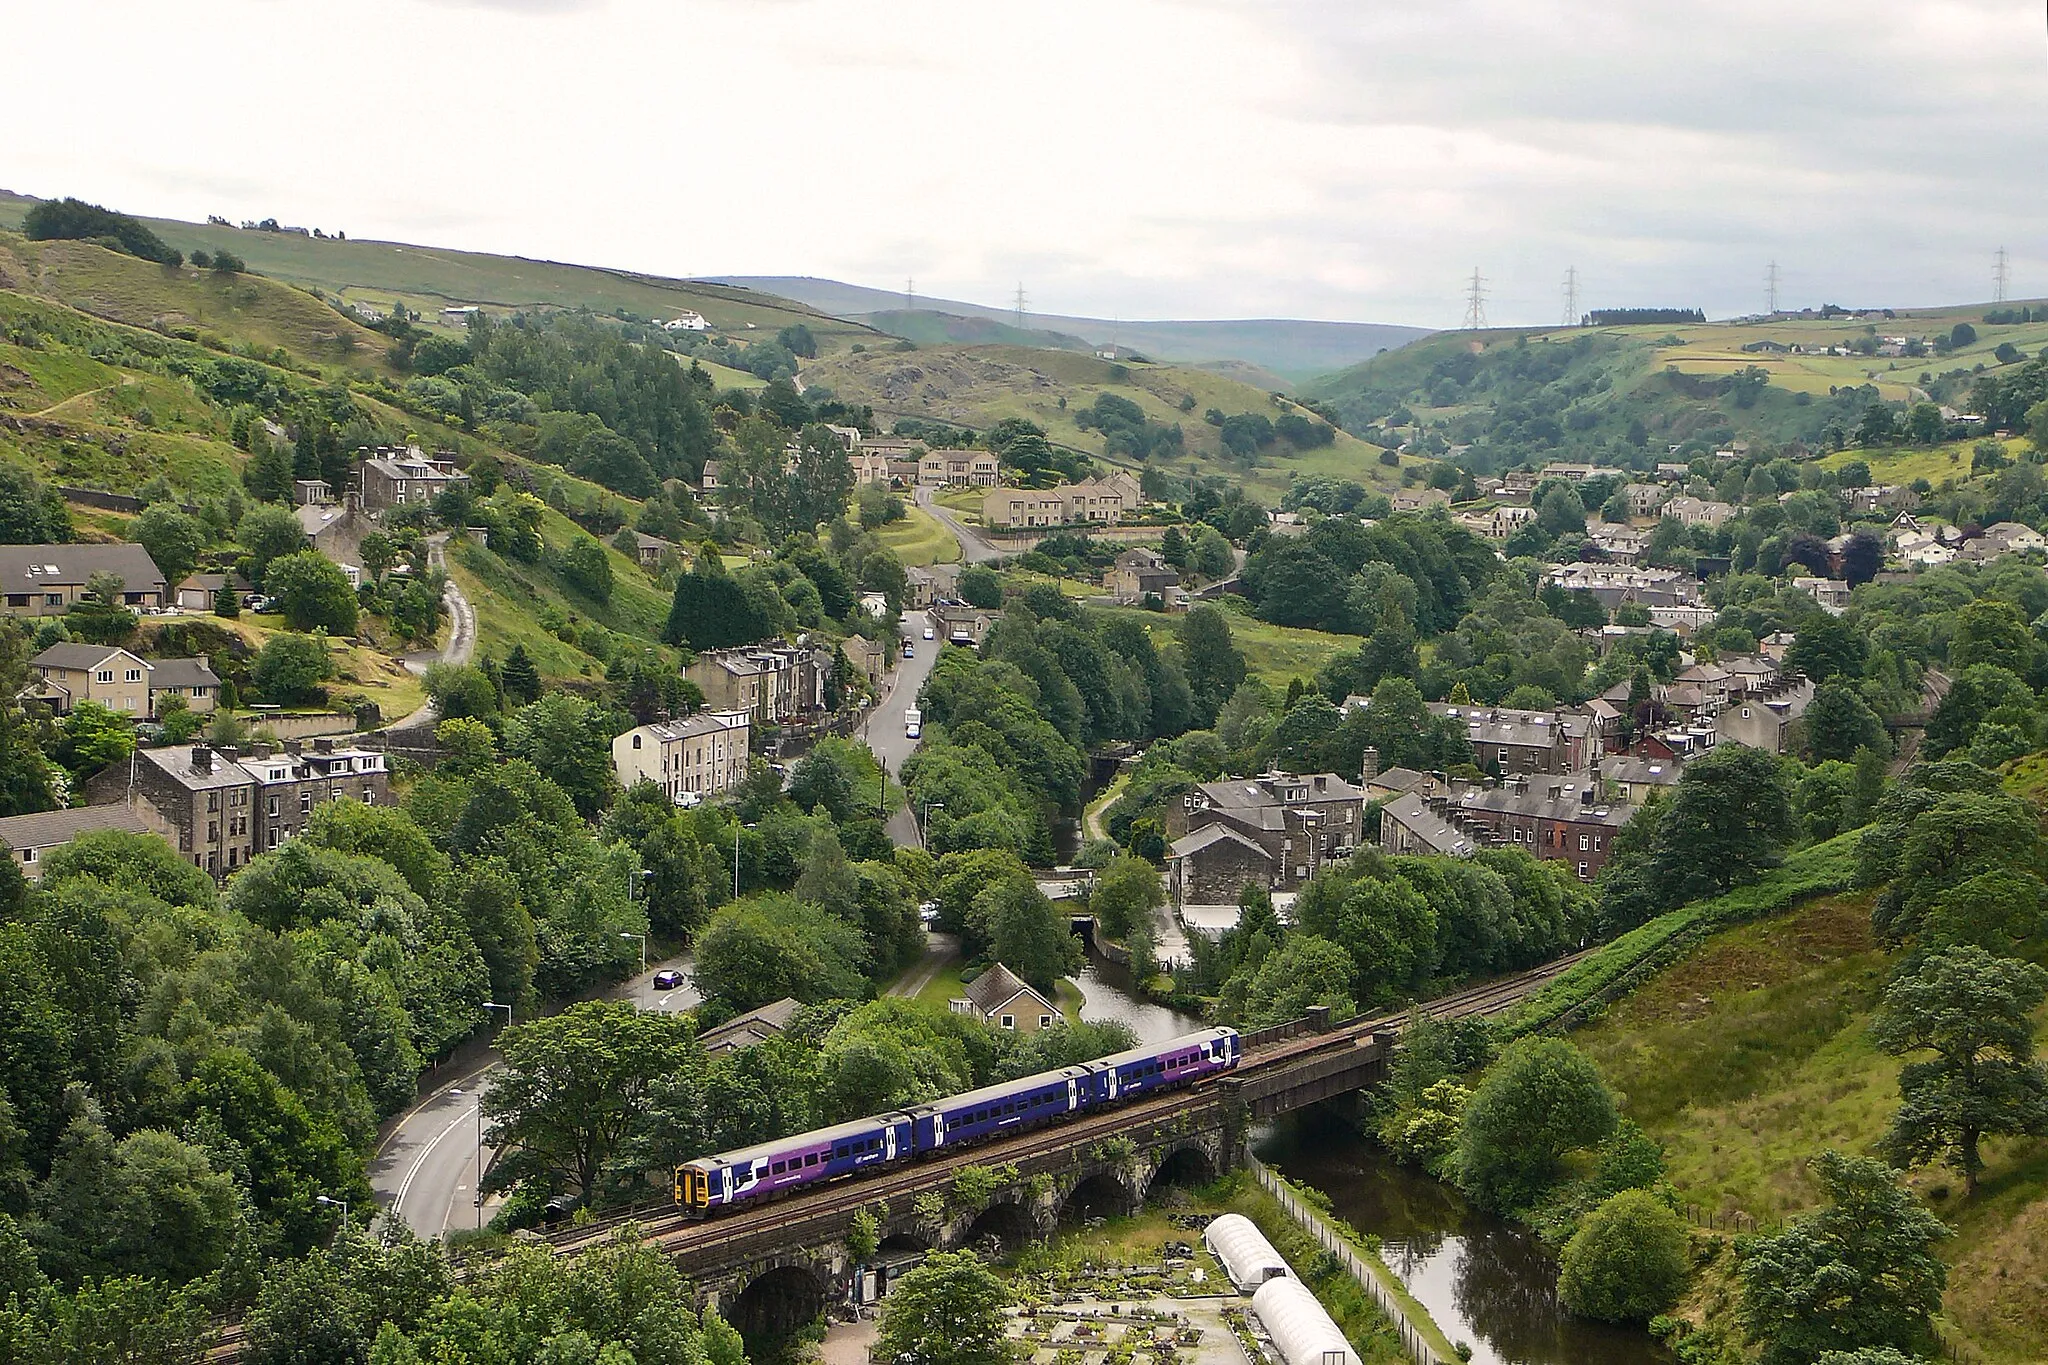 Photo showing: A view of Gauxholme & Walsden, near Todmorden in West Yorkshire from Watty Lane. The picture shows Gauxholme Viaduct in the foreground crossing the Rochdale Canal. Behind that is the village of Walsden.  Taken on Saturday the 10th of July 2010.